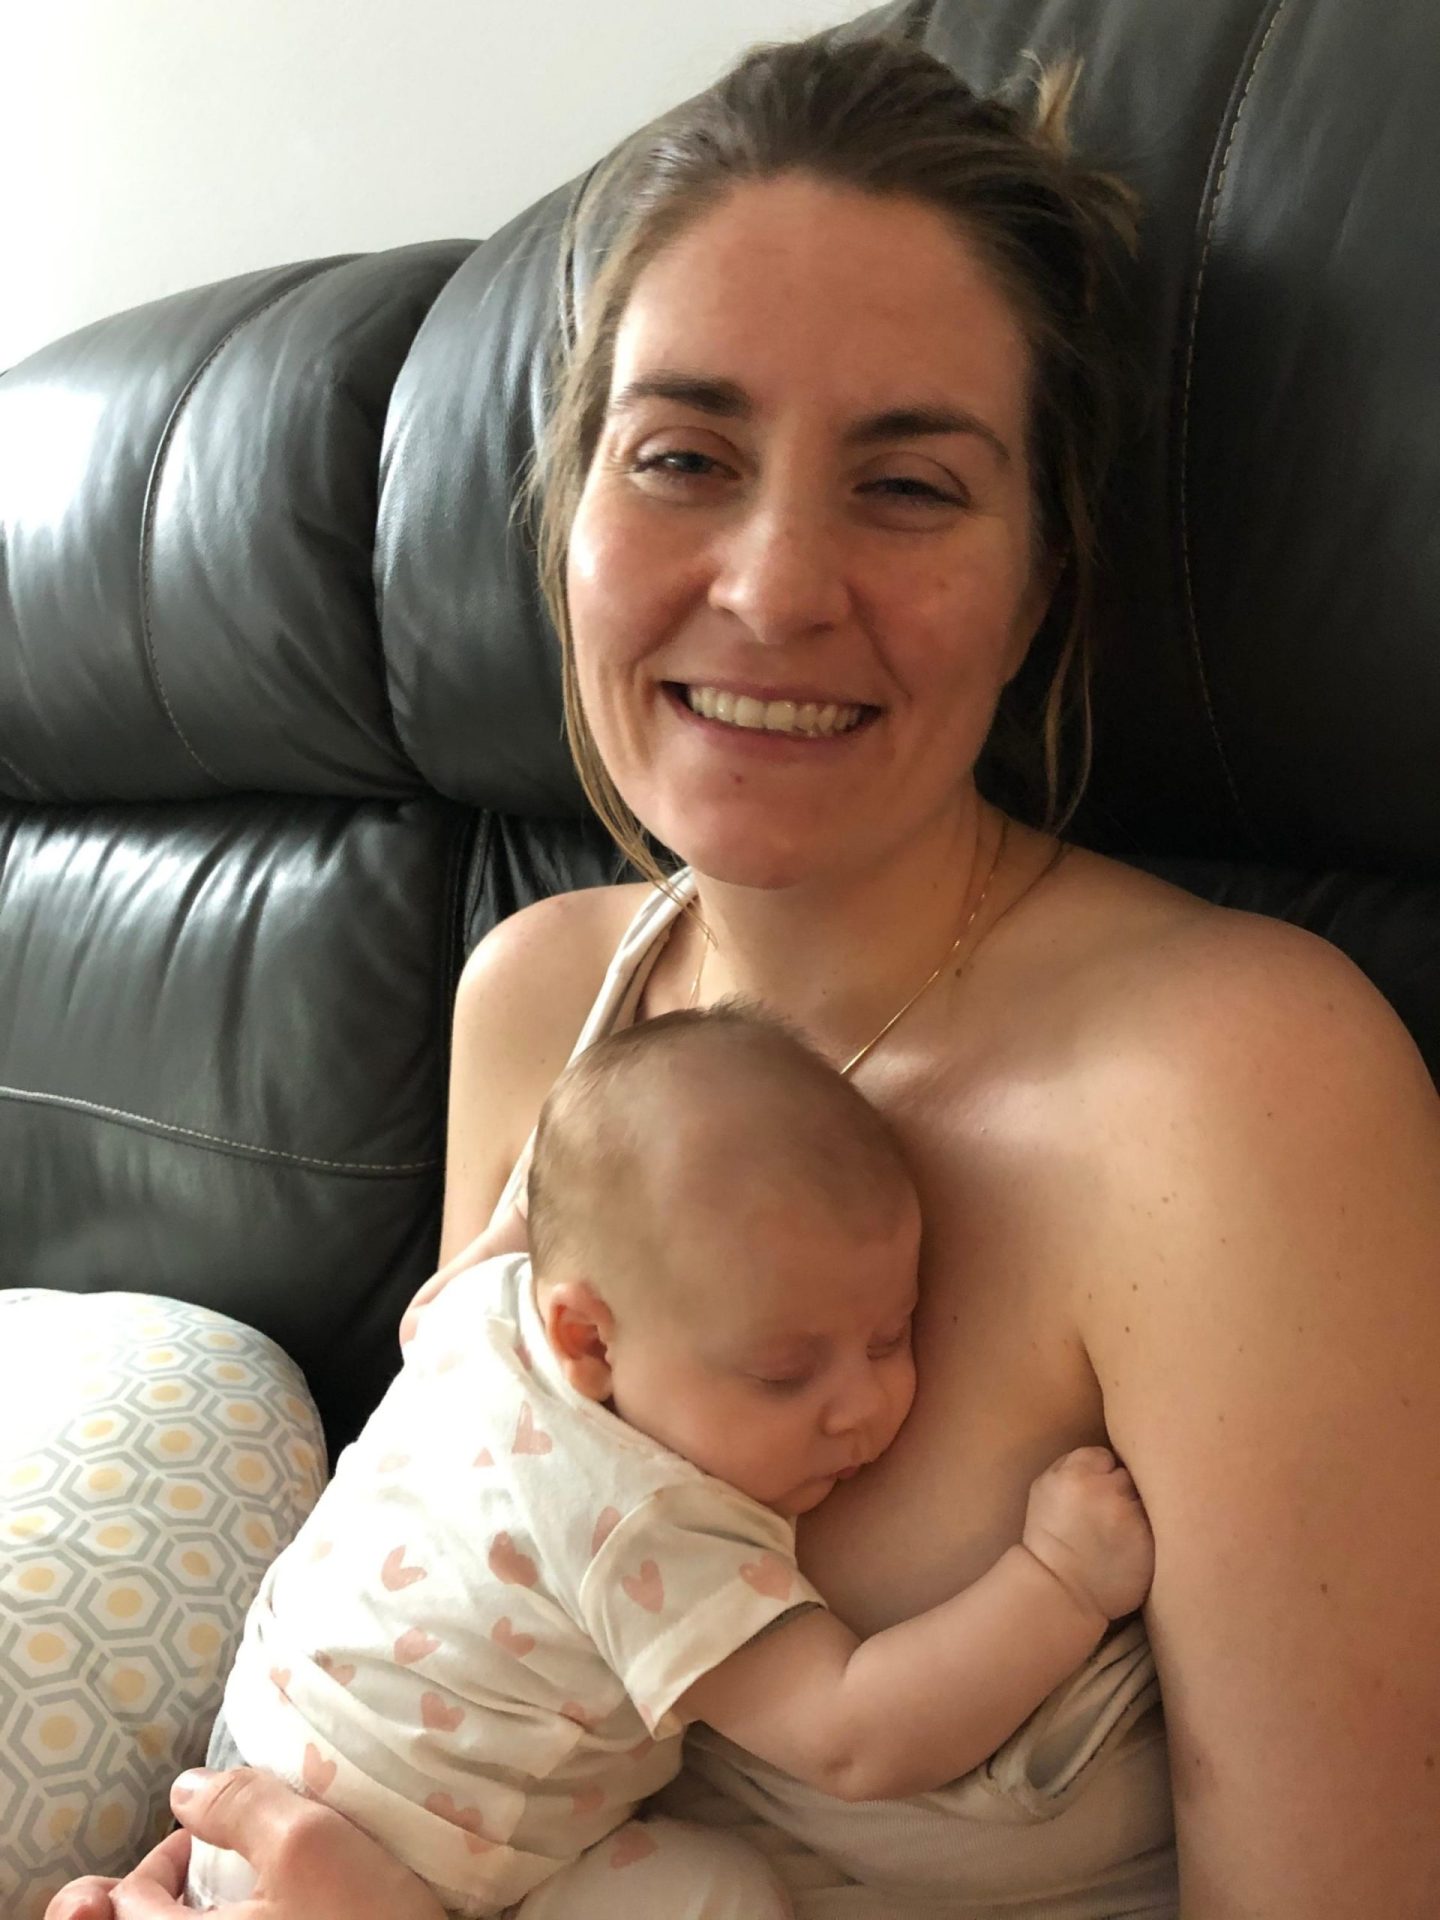 michelle holds her baby and smiles